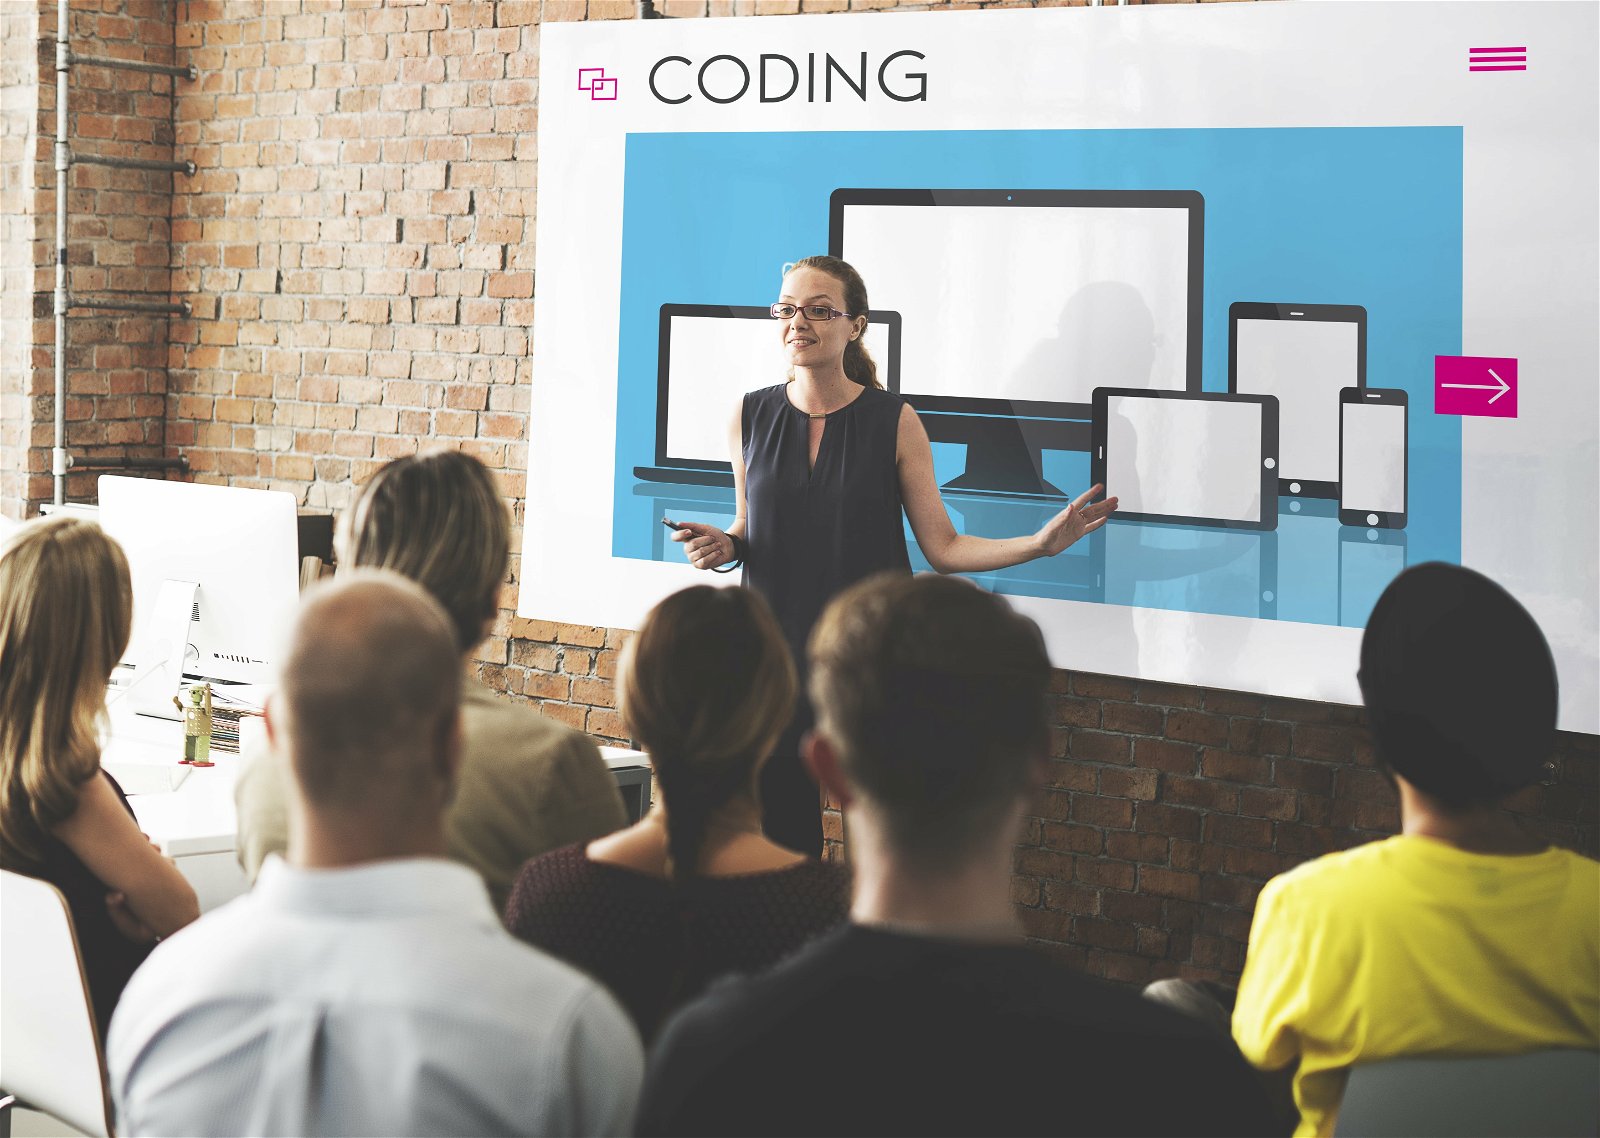 Coding Education- Access to Coding Education